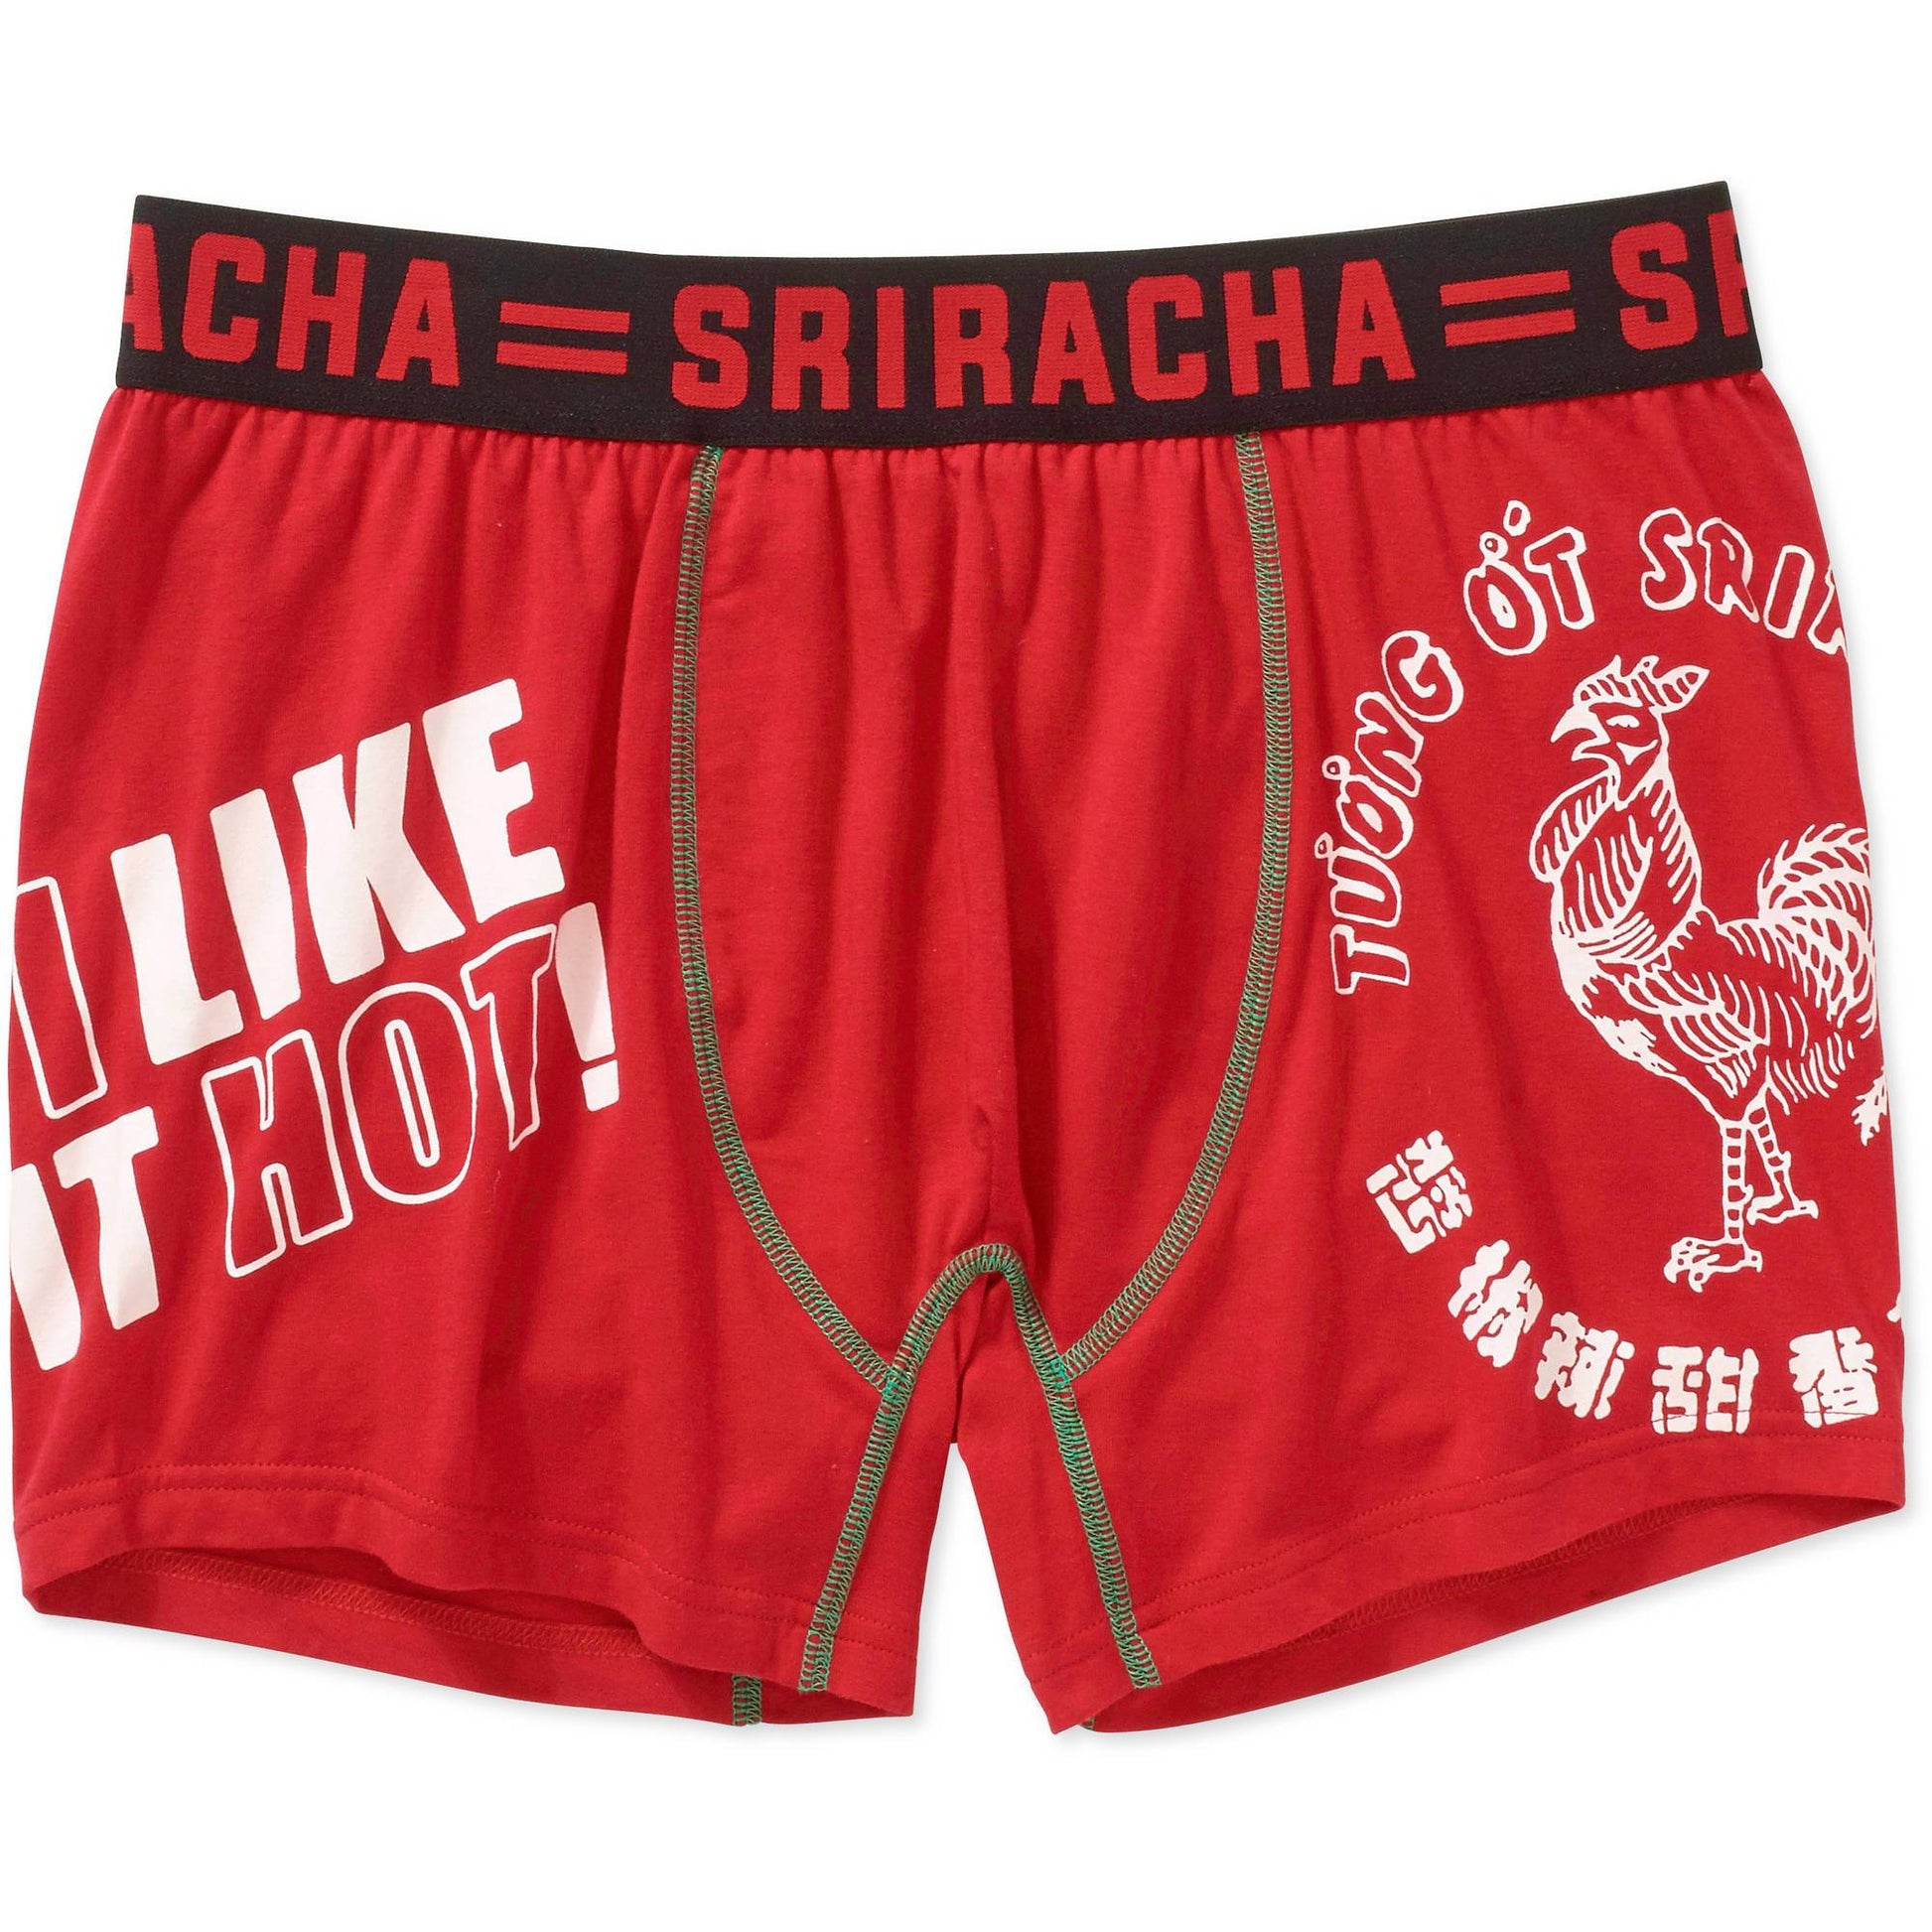 Sriracha I Like it Hot Knit Cotton Blend Boxers Briefs – Crazy Awesome Socks